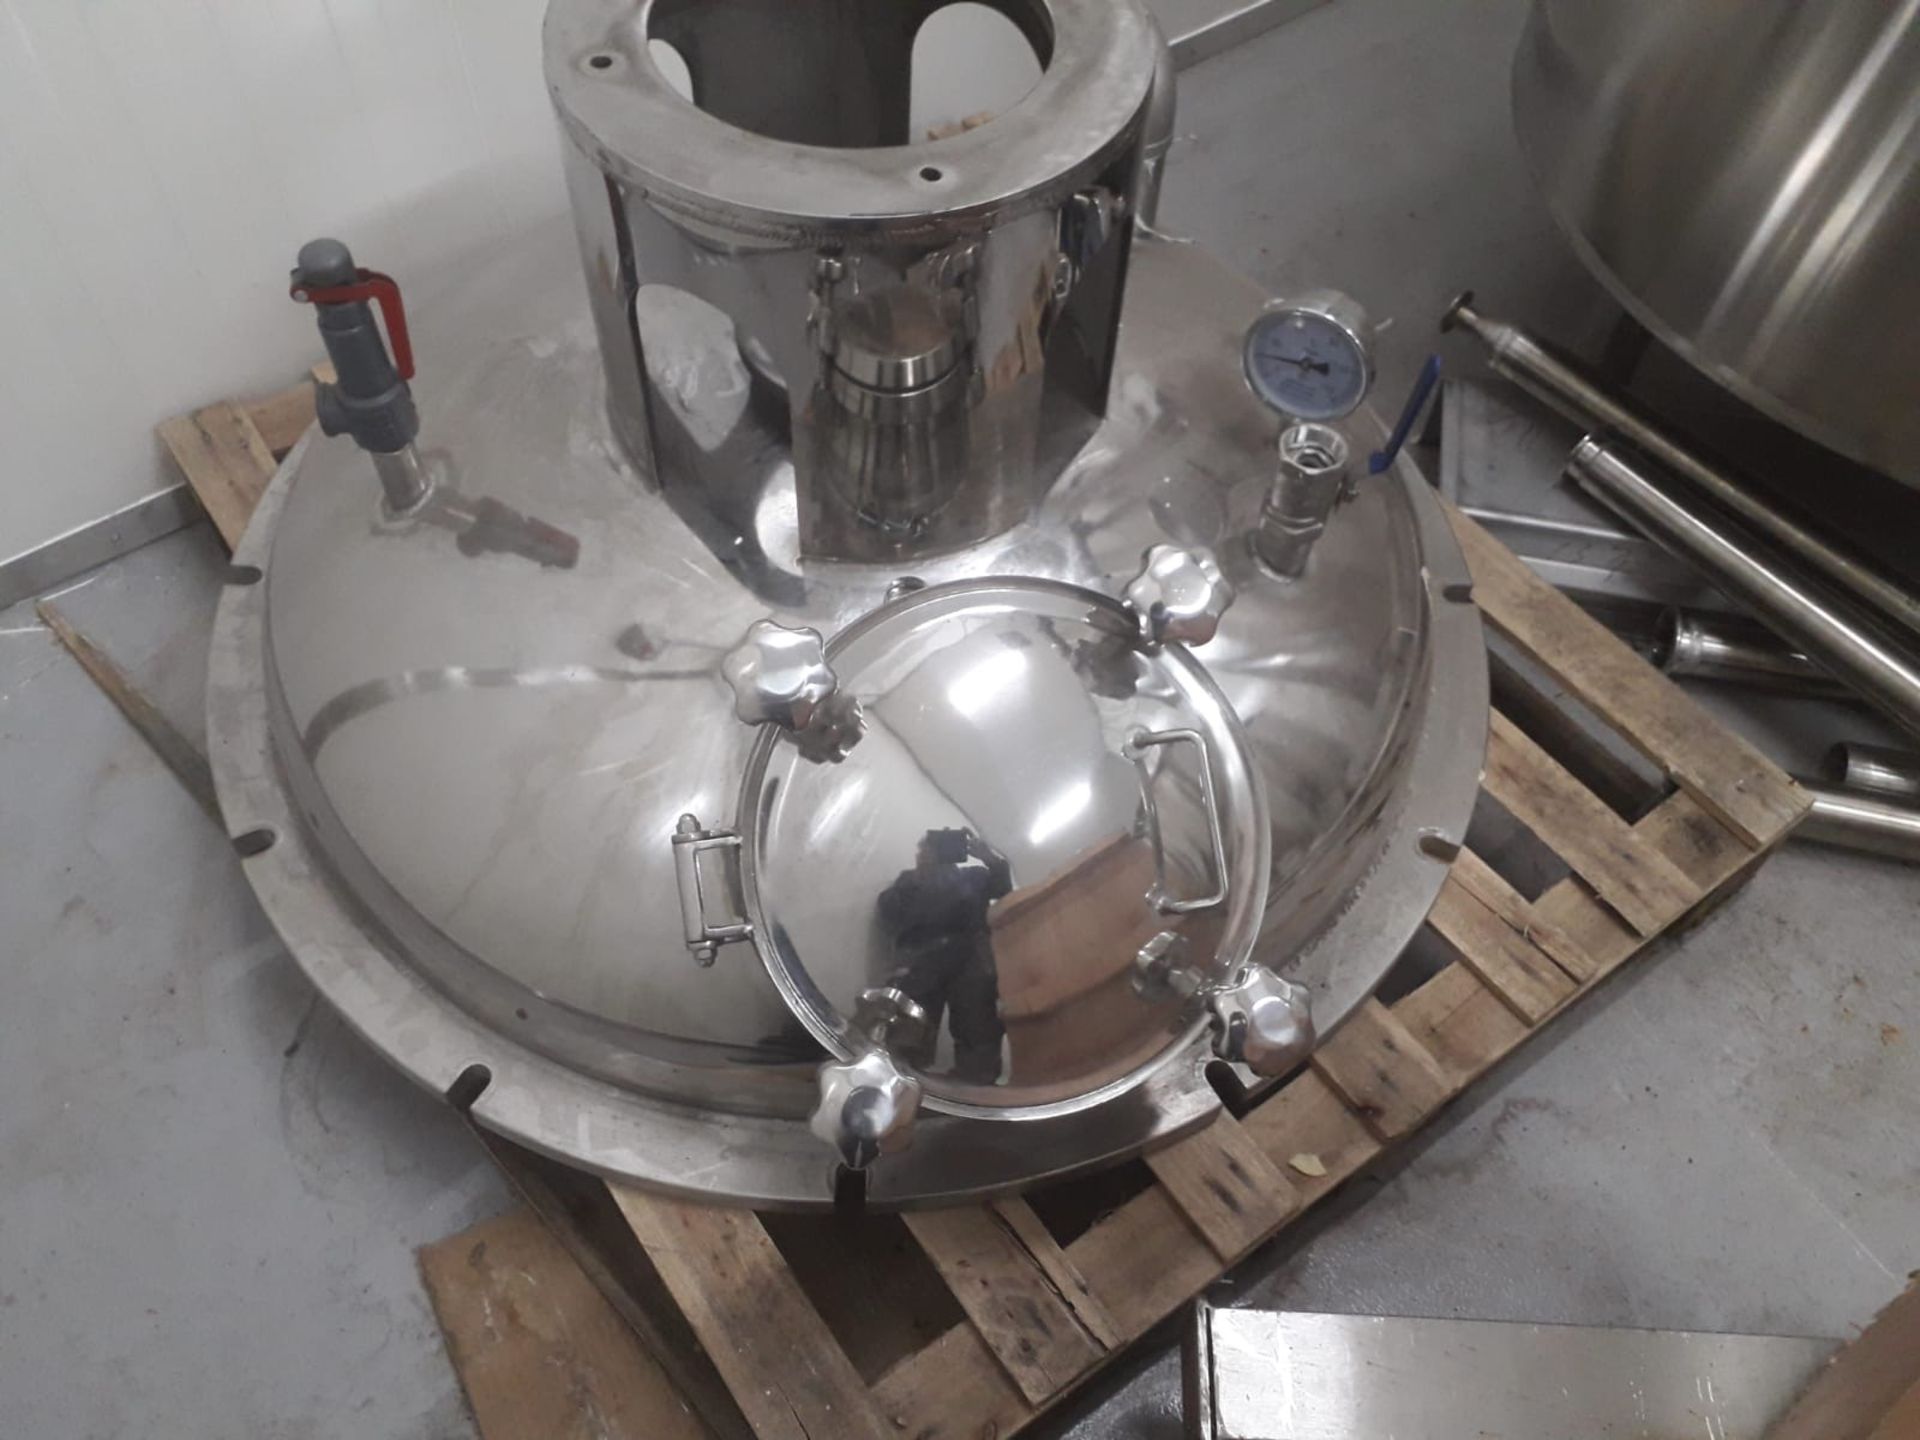 JACKETED COOKING VESSEL. - Image 4 of 17